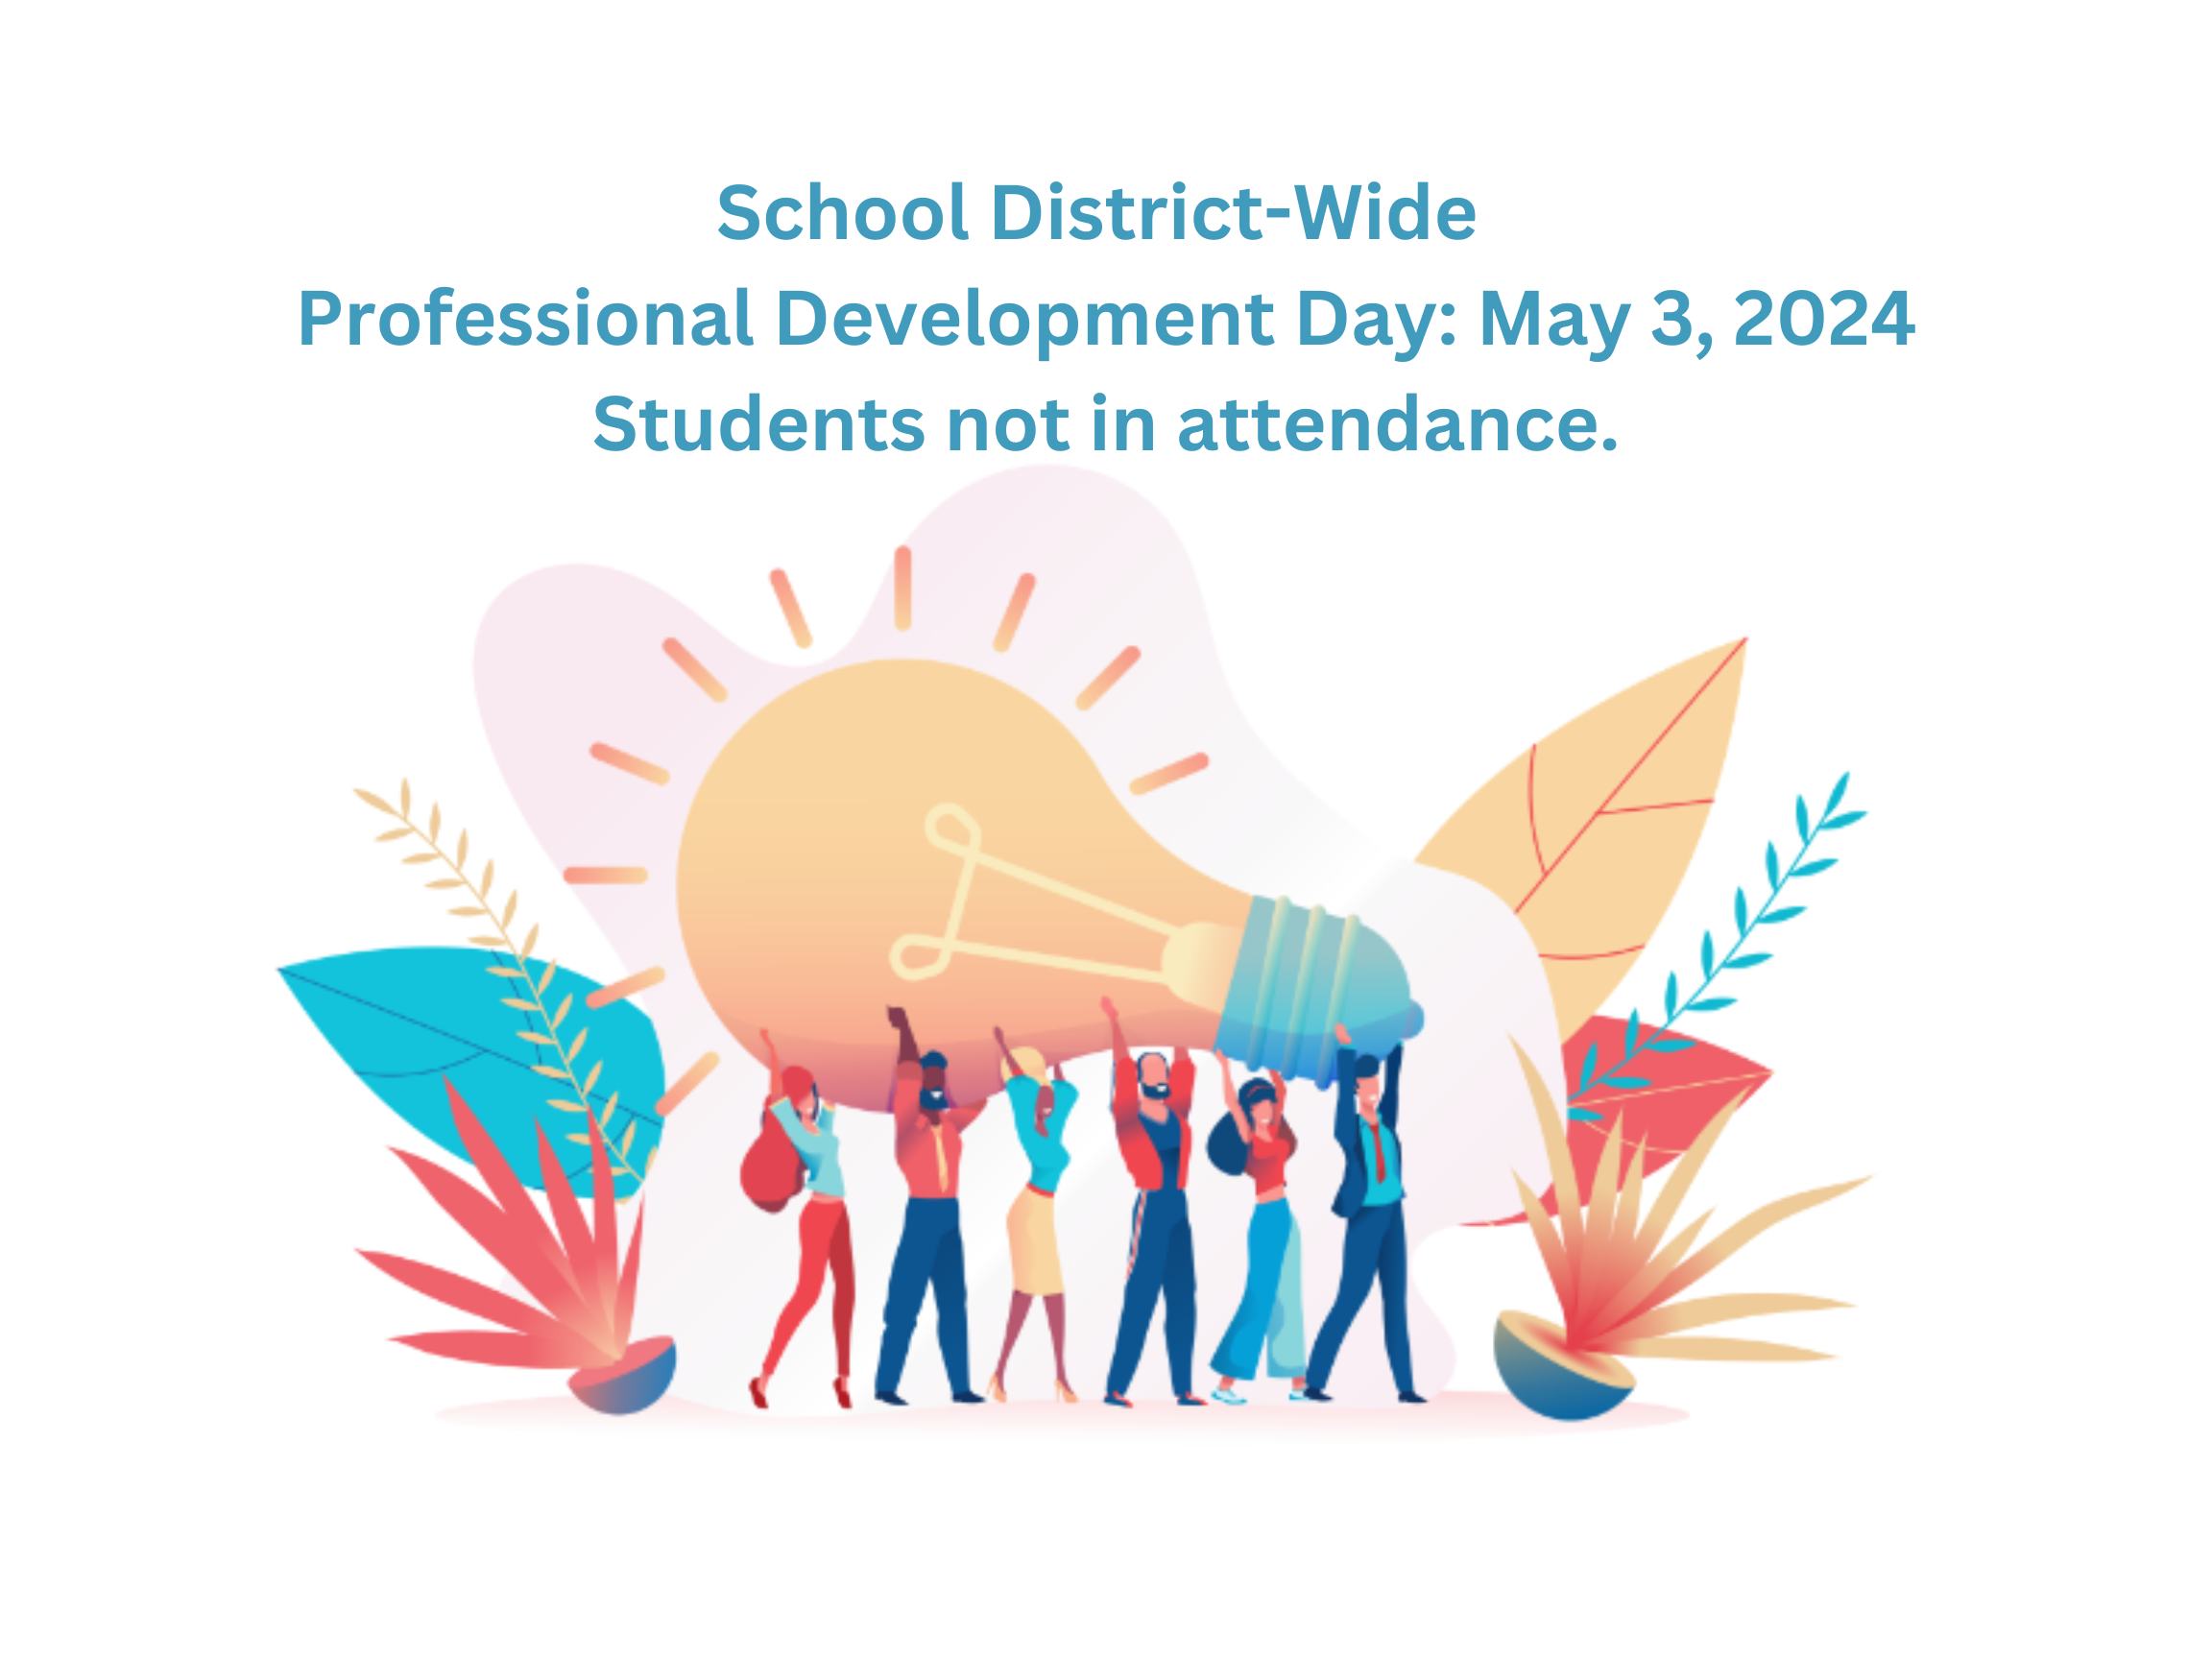 School District-Wide ProD Day: May 3, 2024 - Students not in attendance.  